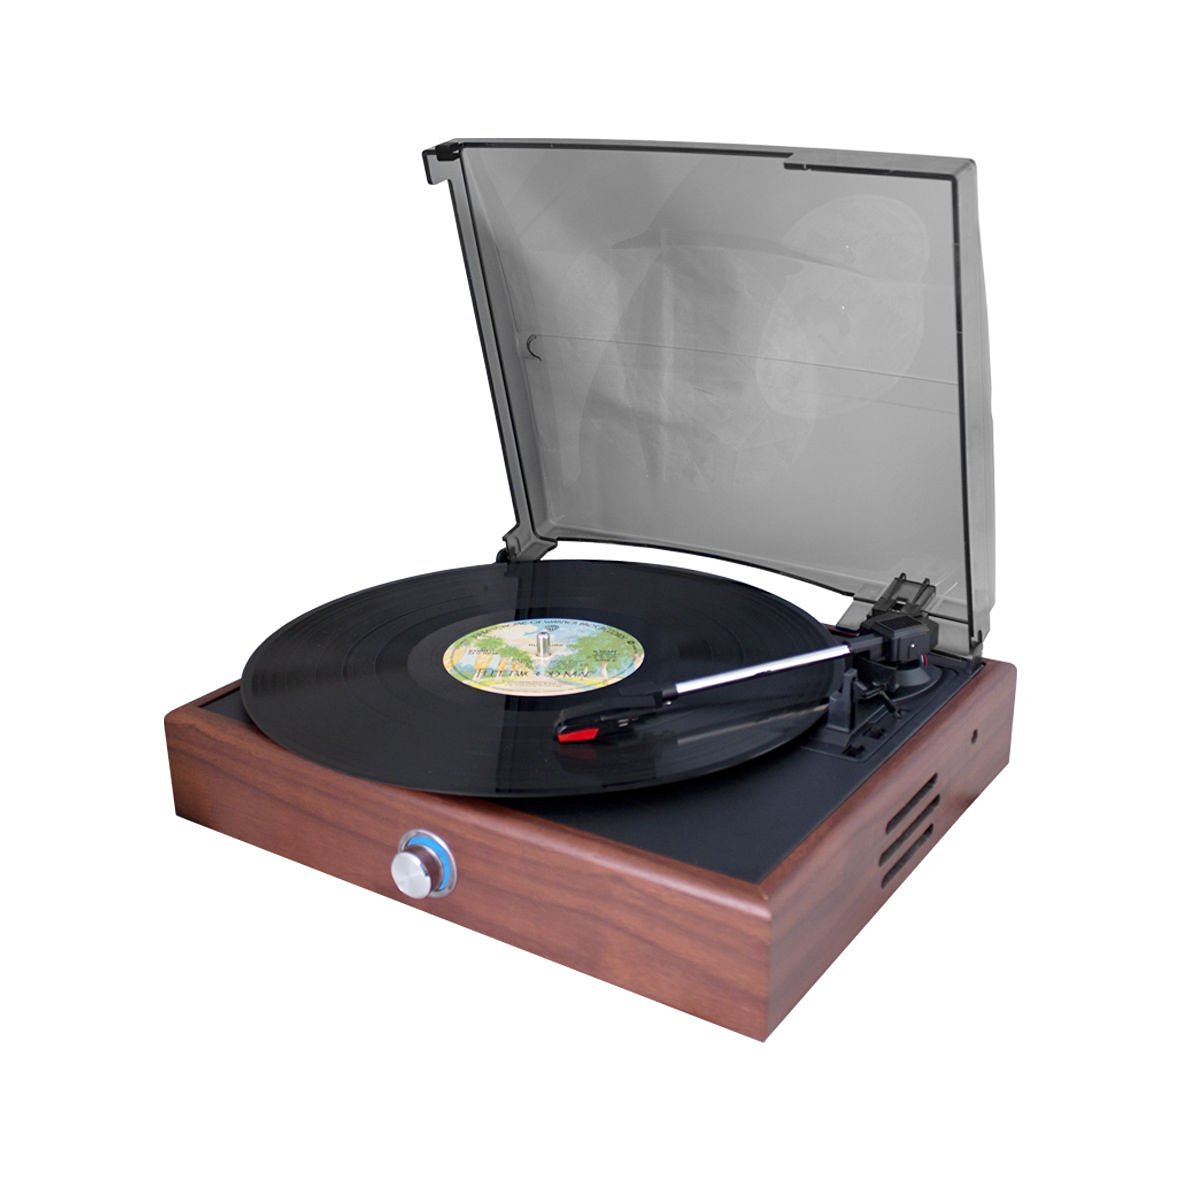 bush turntable with speakers